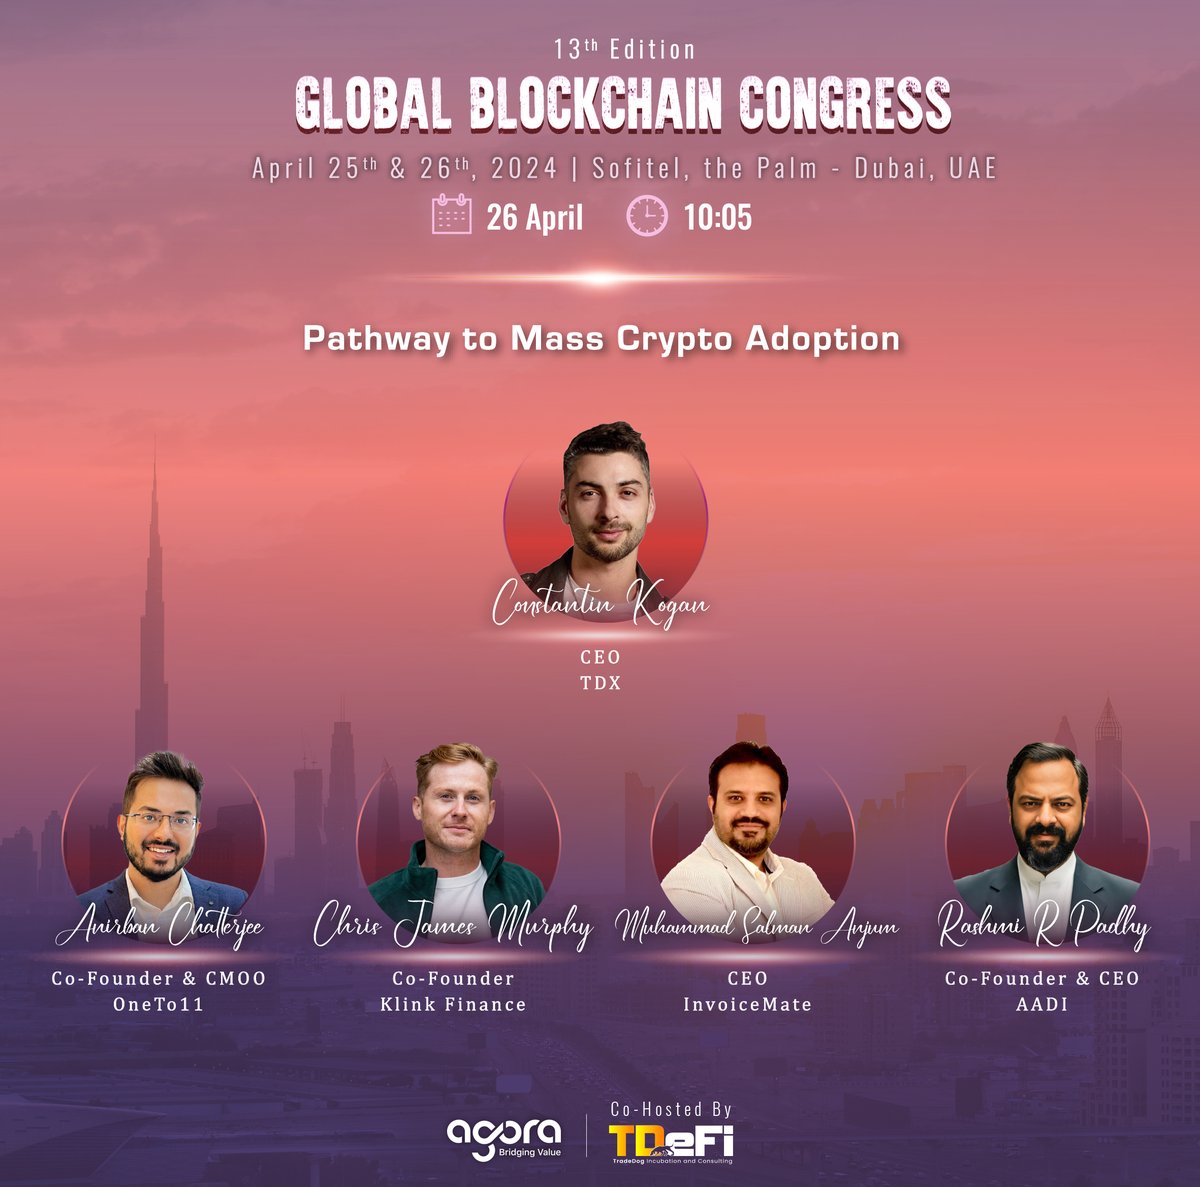 Pathway to Mass Crypto Adoption Join @constkogan, Anirban Chatterjee, @ChrisjamesIRL, @TheFeelogical, and @rashmiranjan at the 13th GBC for an exciting panel discussion on mass cyrpto adoption. Register here: bit.ly/13th-GBC #blockchain #dubai